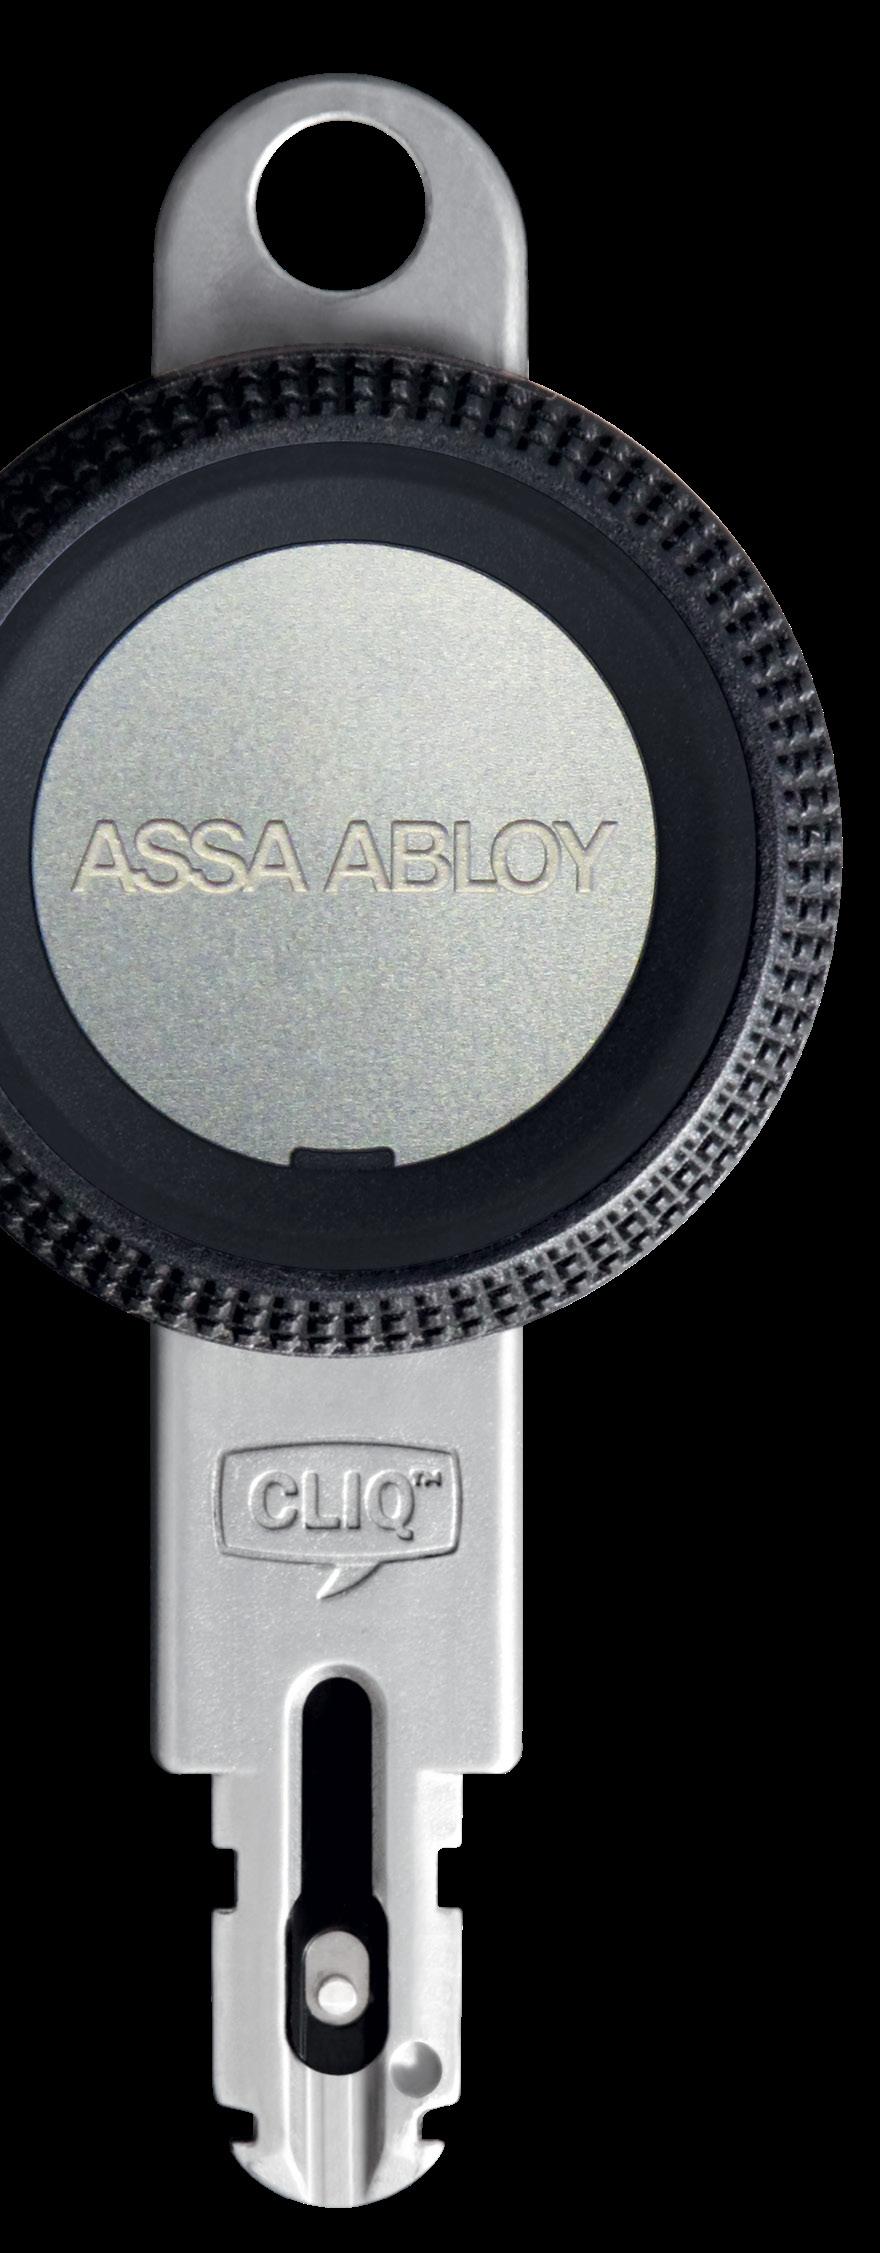 In addition to maintaining a significant market share in New Zealand, ASSA ABLOY also export New Zealand made products throughout the world.